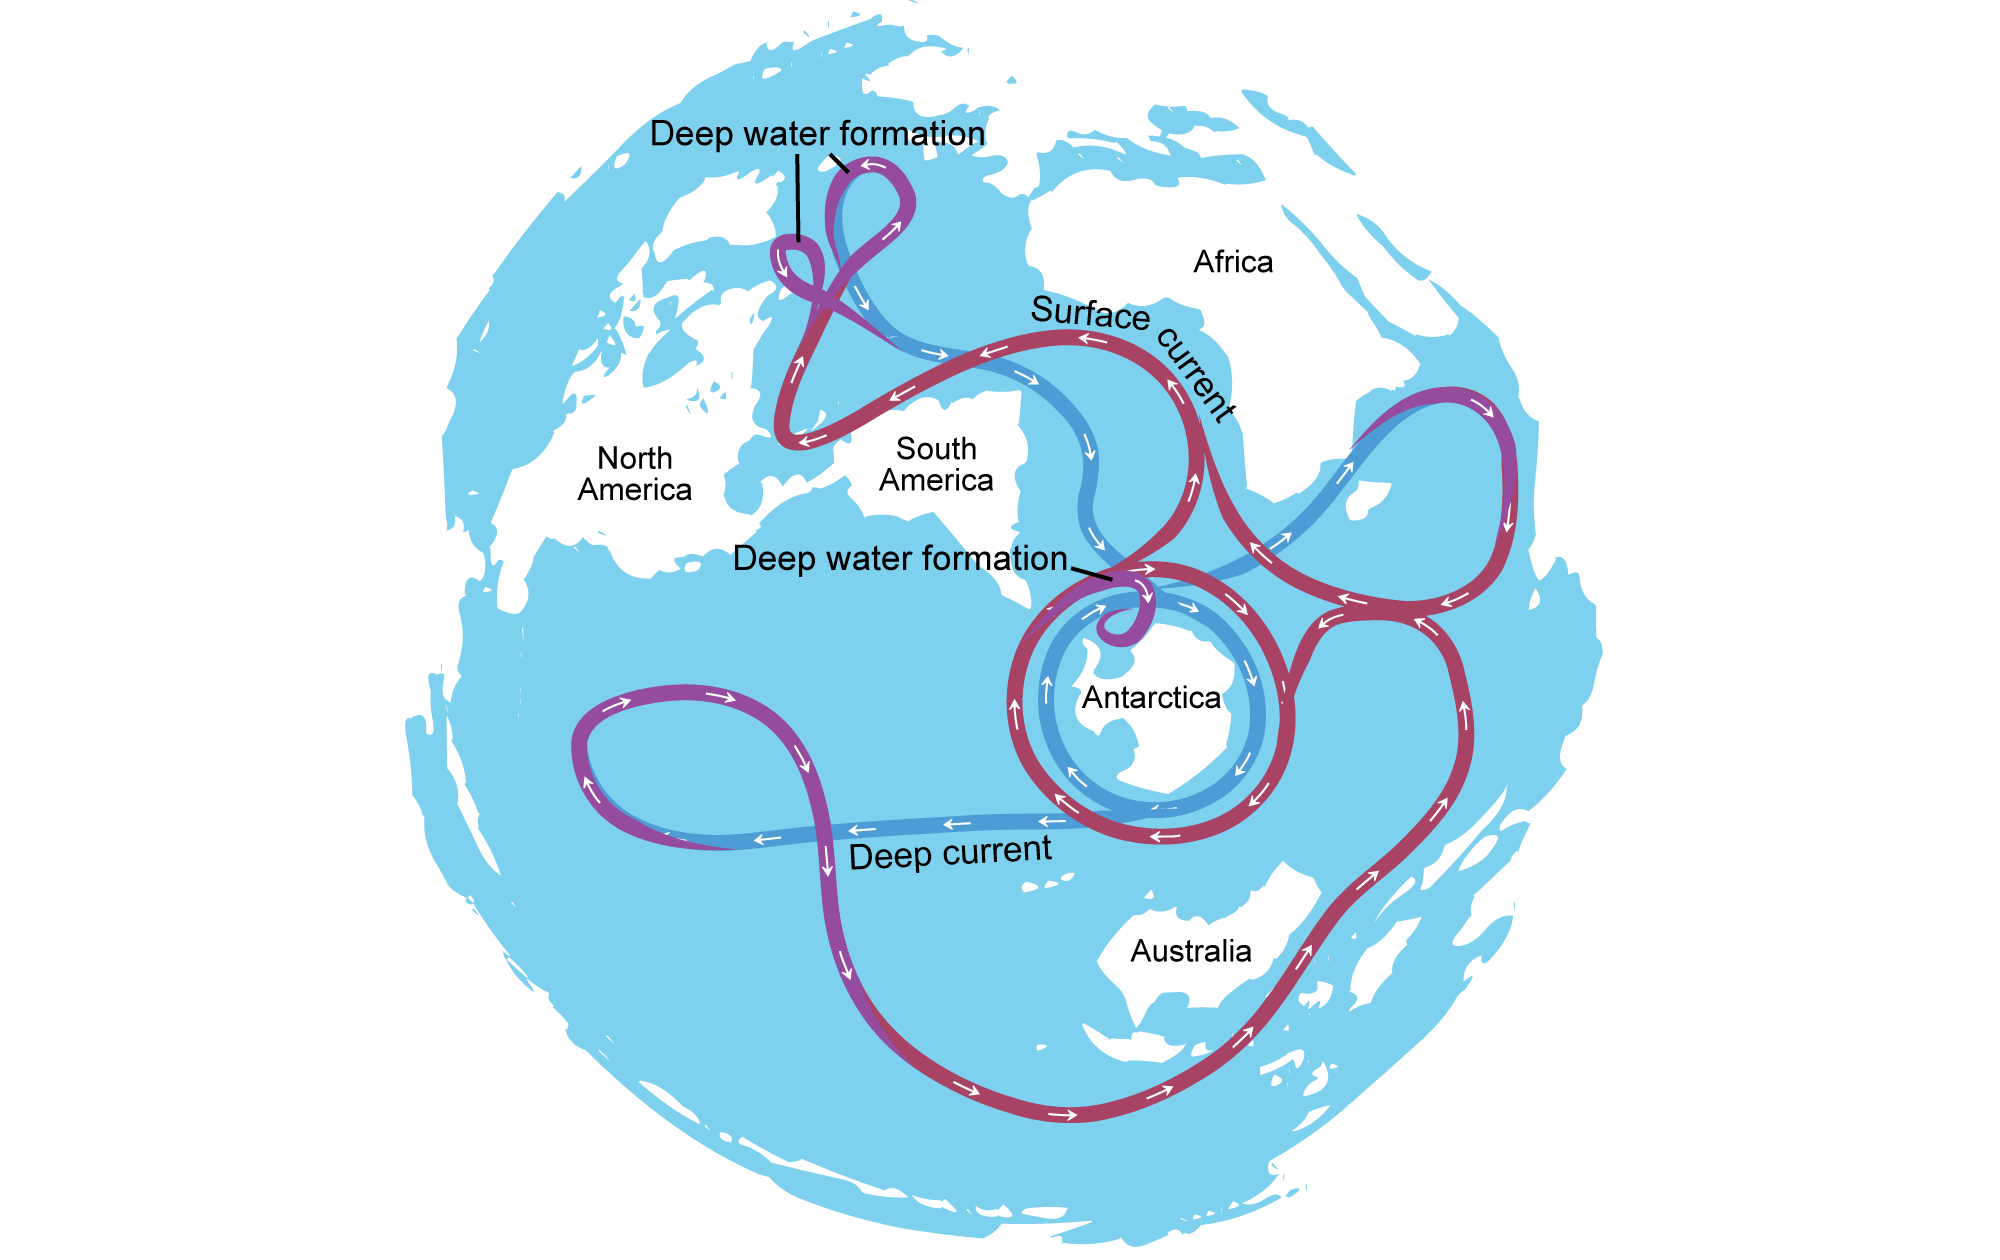 Diagram showing thermohaline circulation in the world's oceans from a south polar perspective.